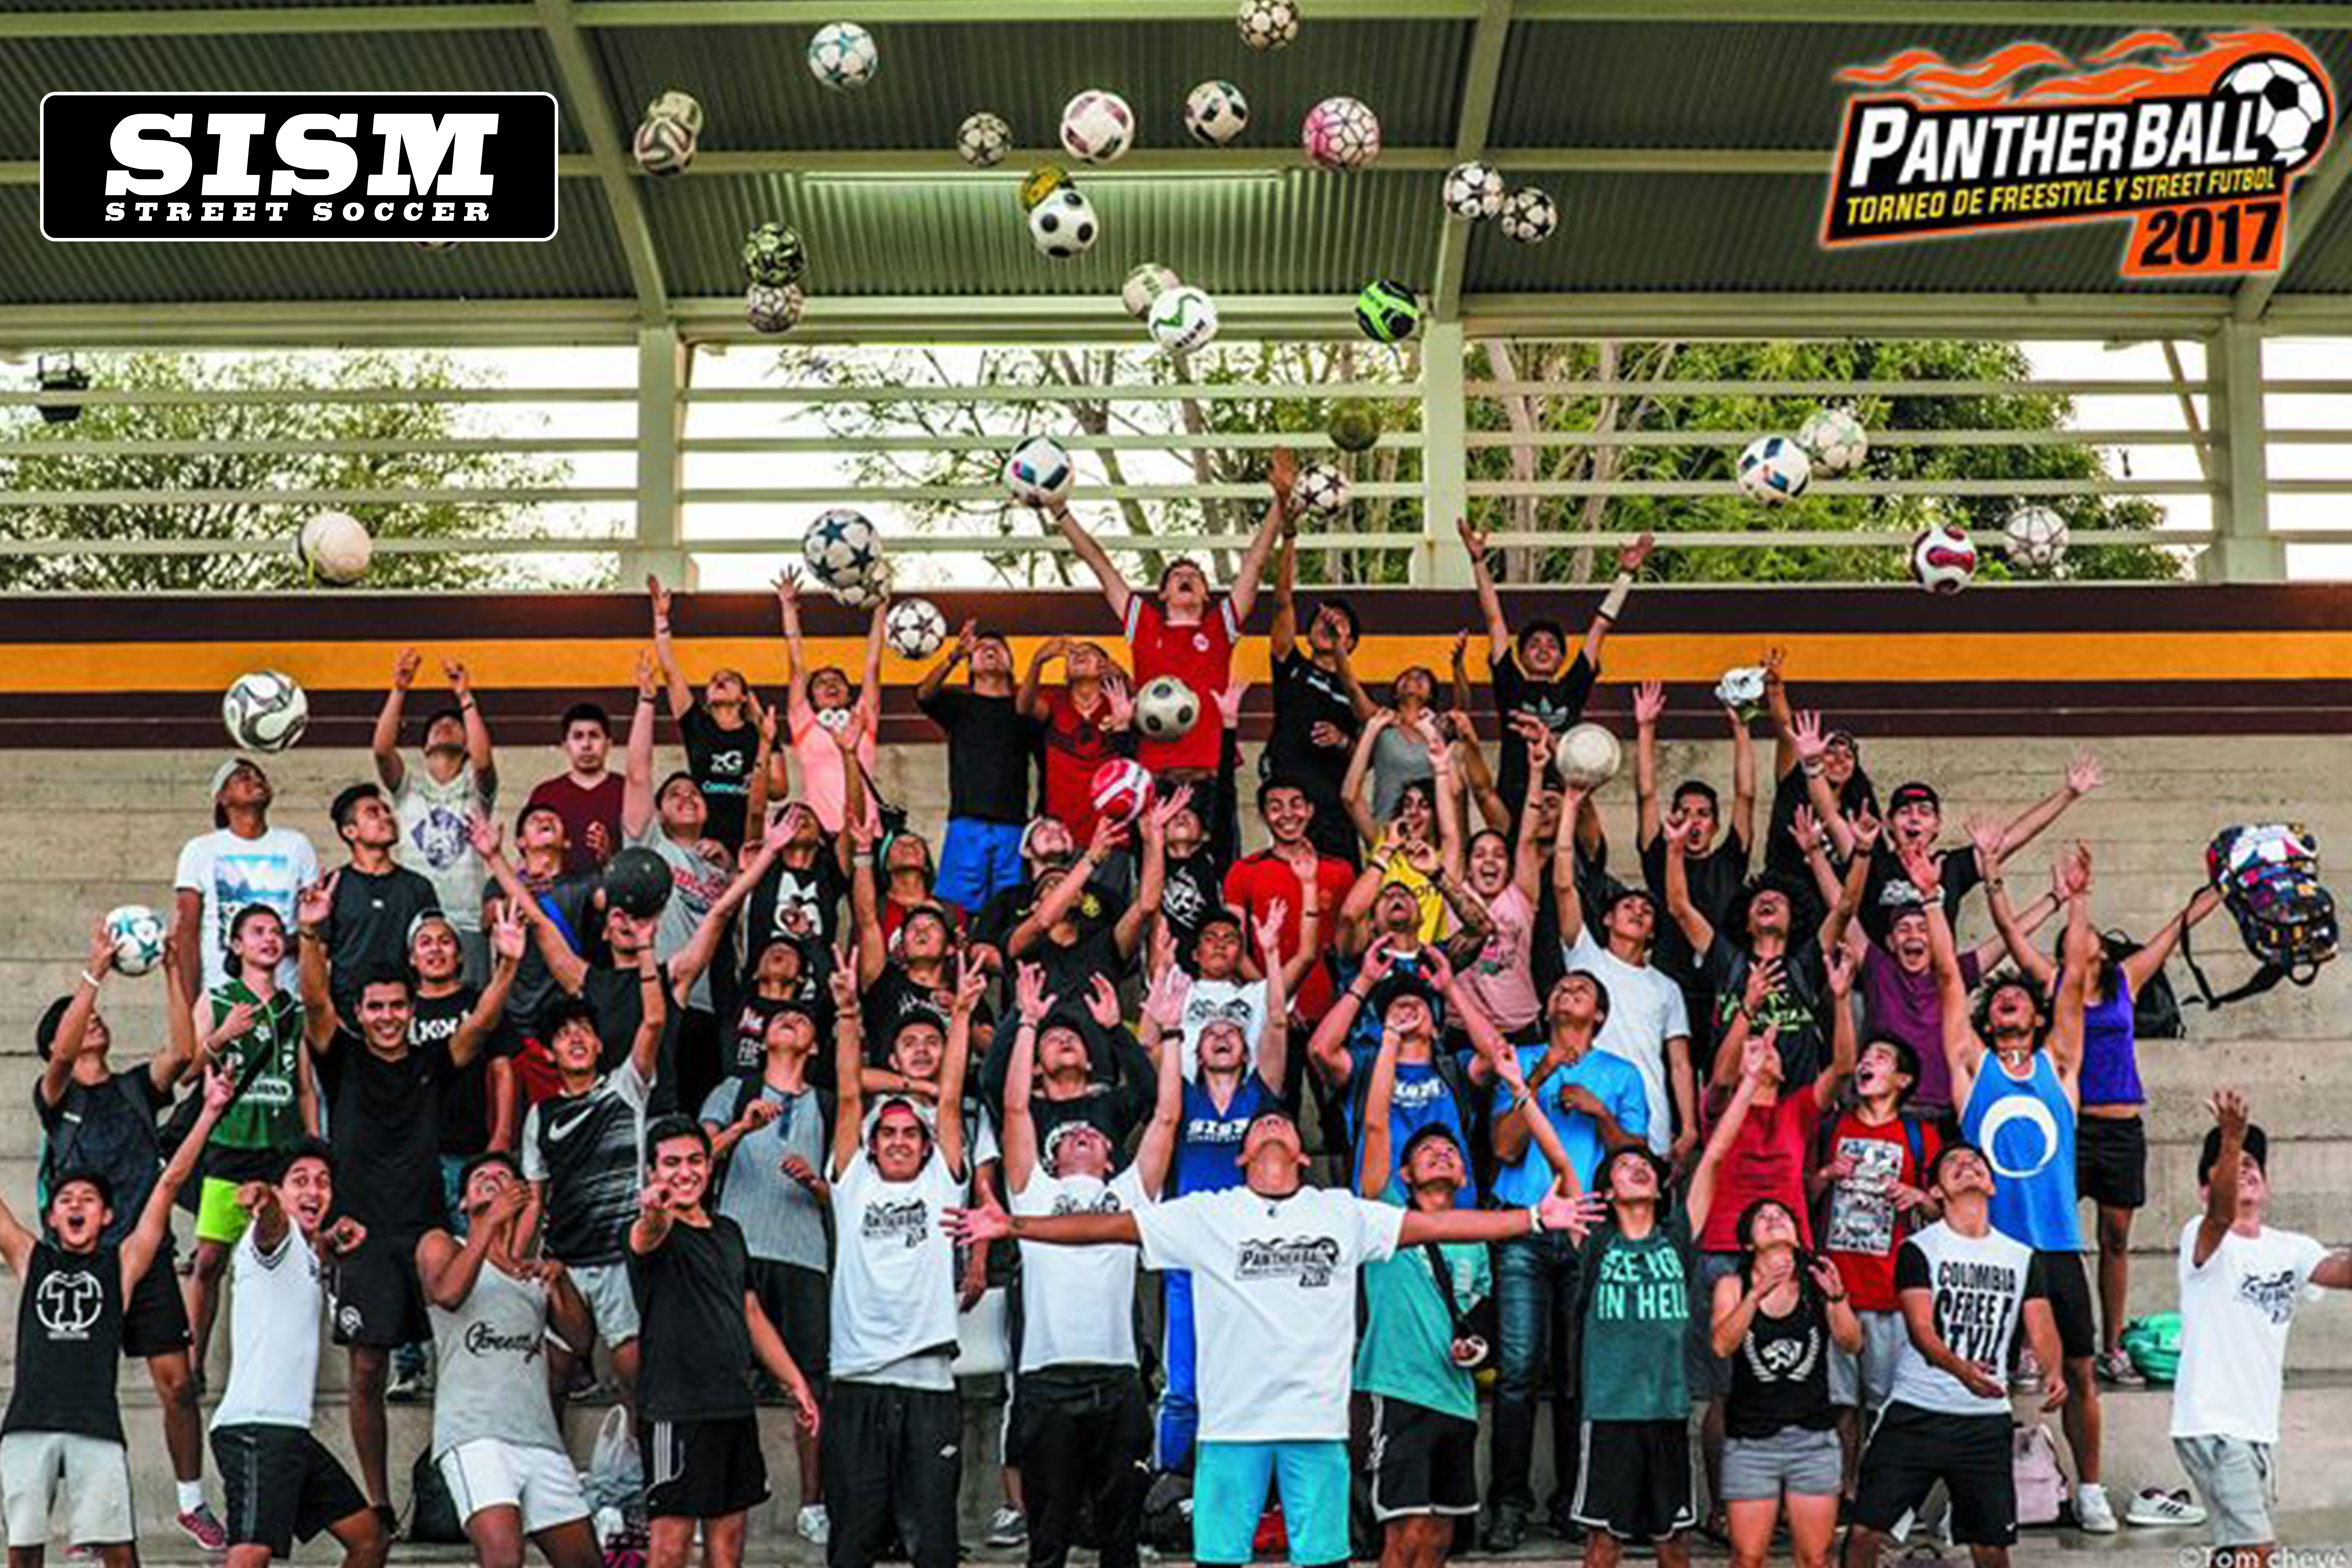 2017 PantherBall - Mexico City